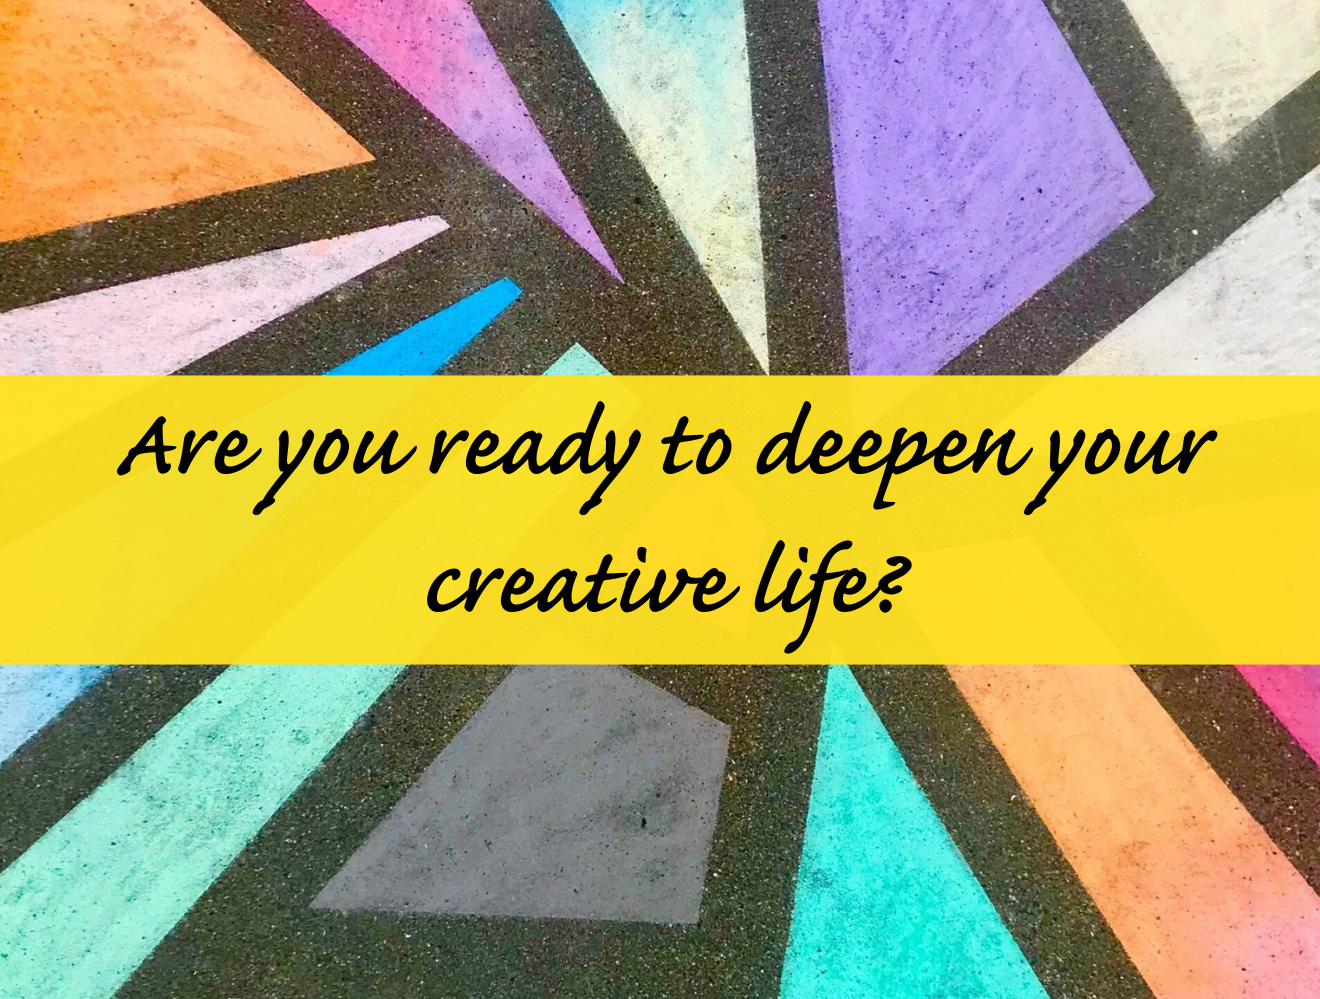 deepen your creative life